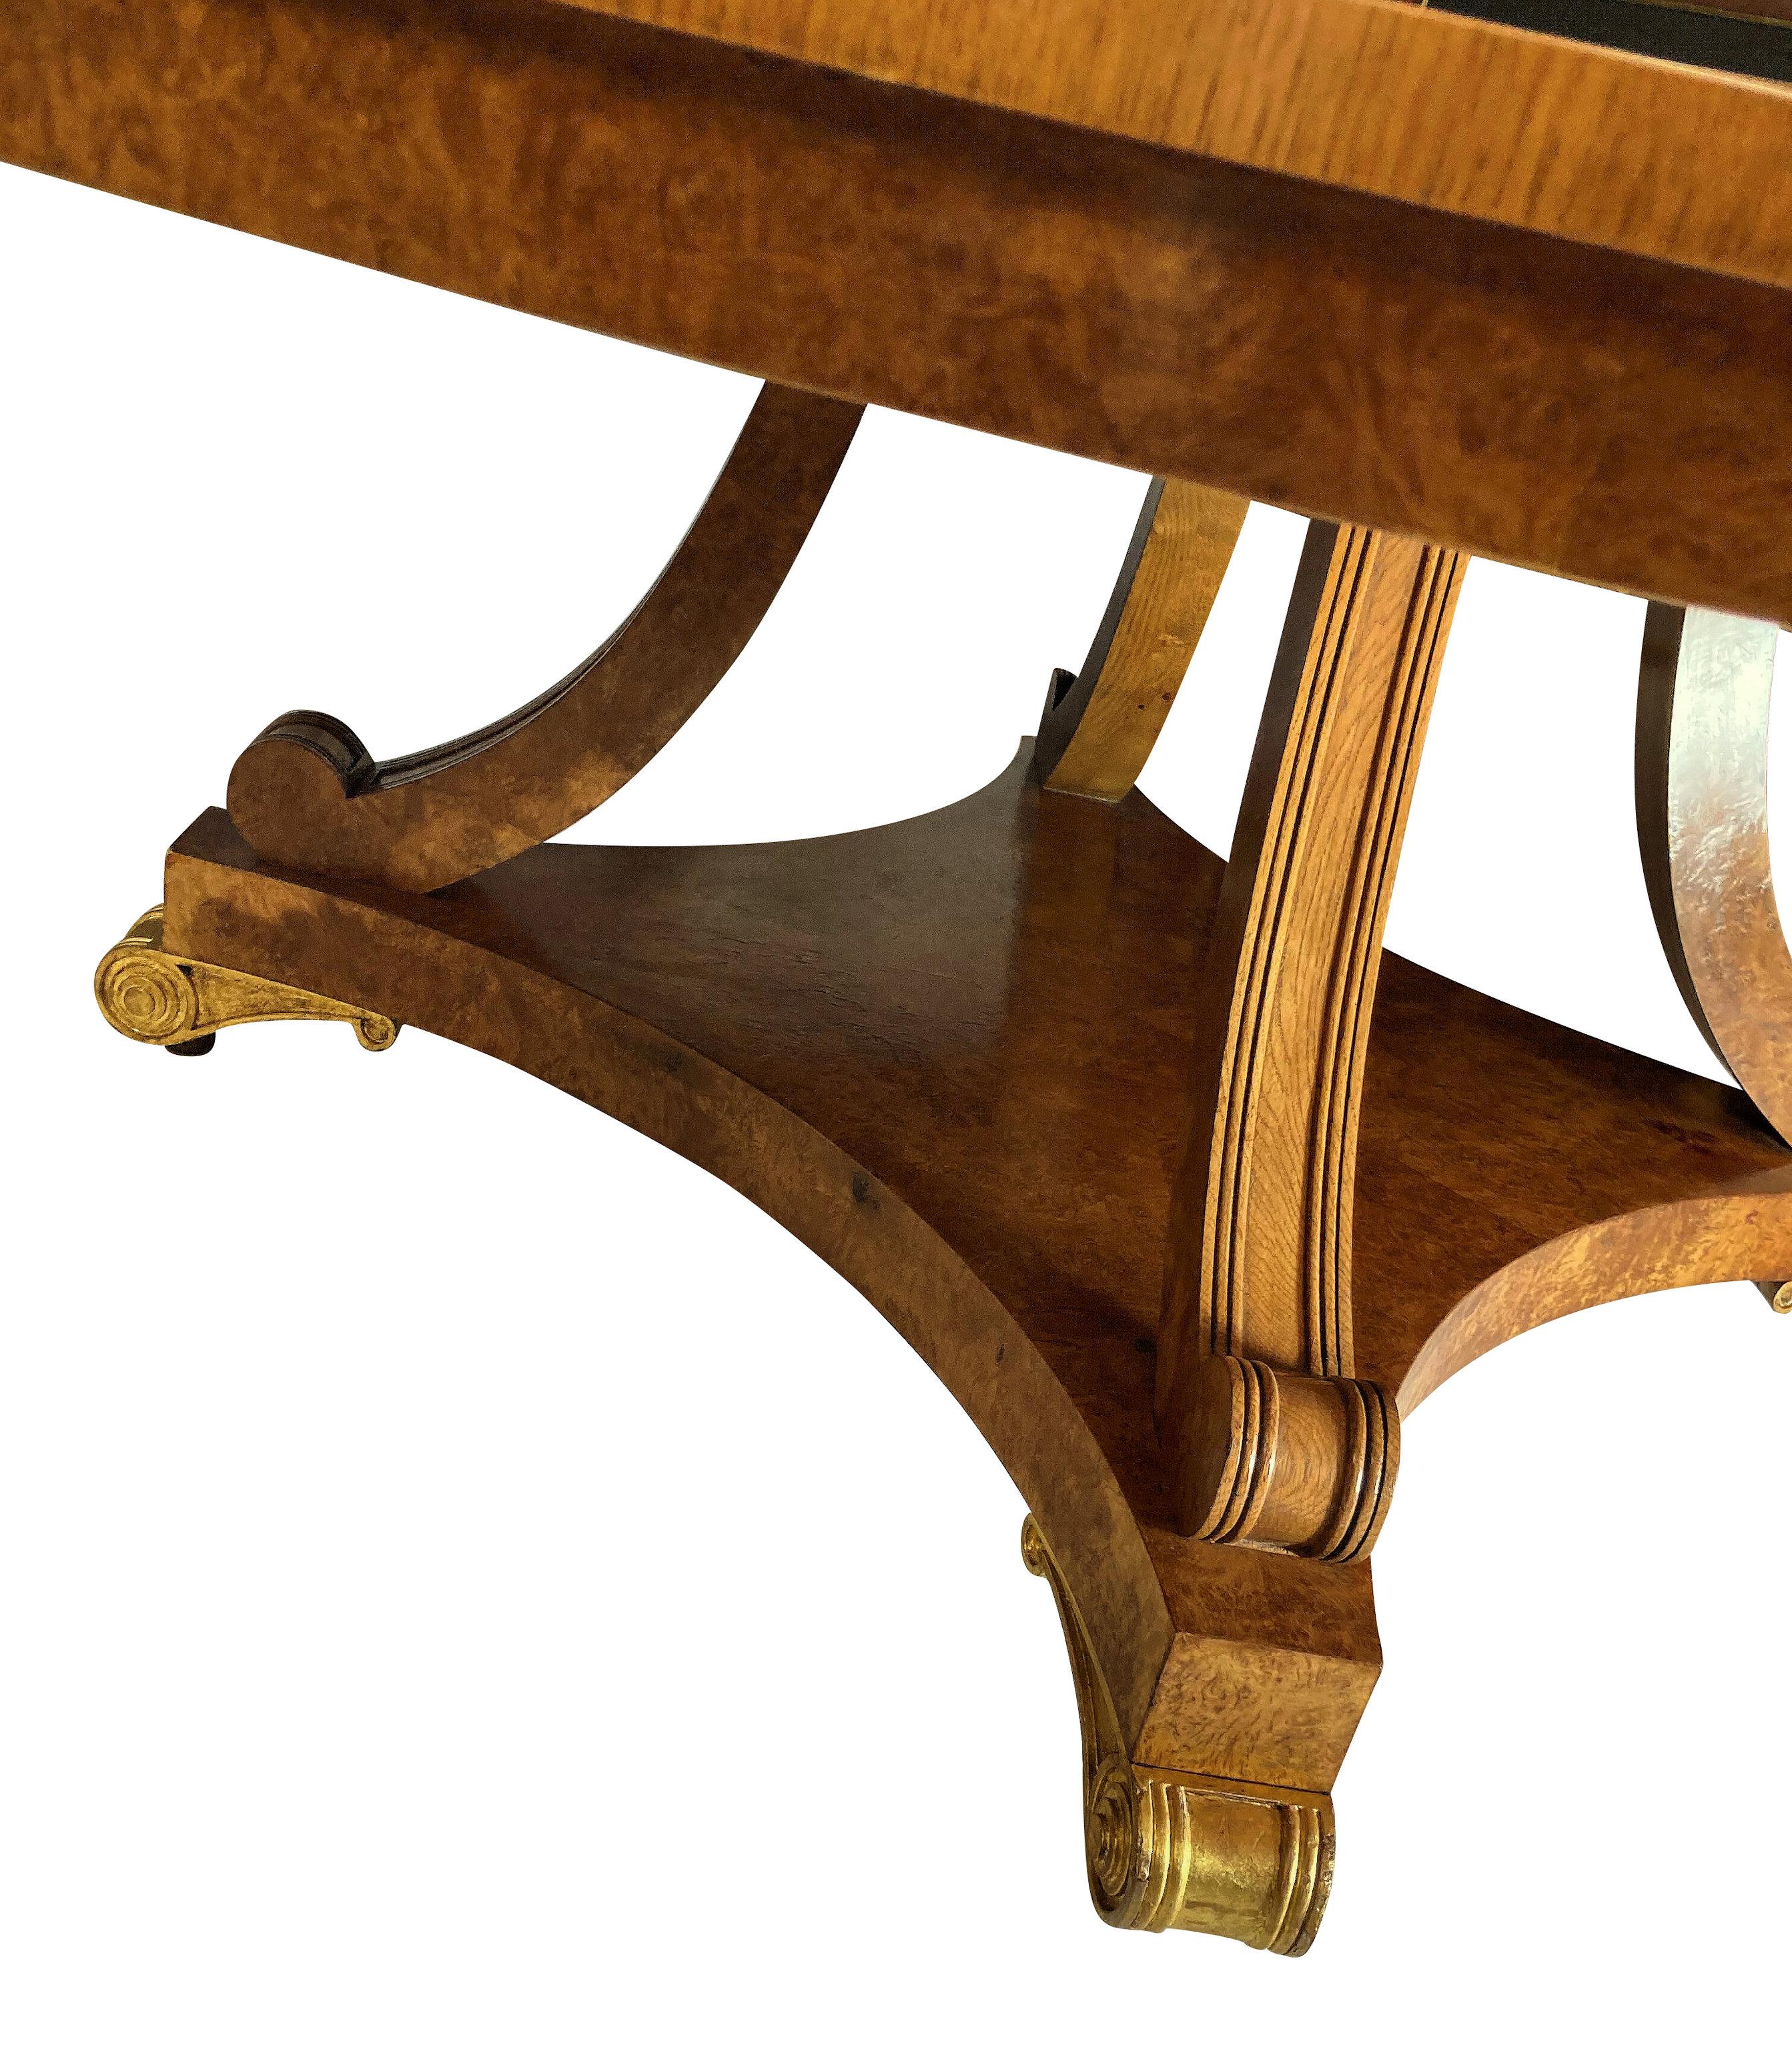 A large English breakfast table in pollard oak in the manner of George Bullock. With fine figuring, the base with water gilded feet and detachable top. This table will seat 8-10 people.